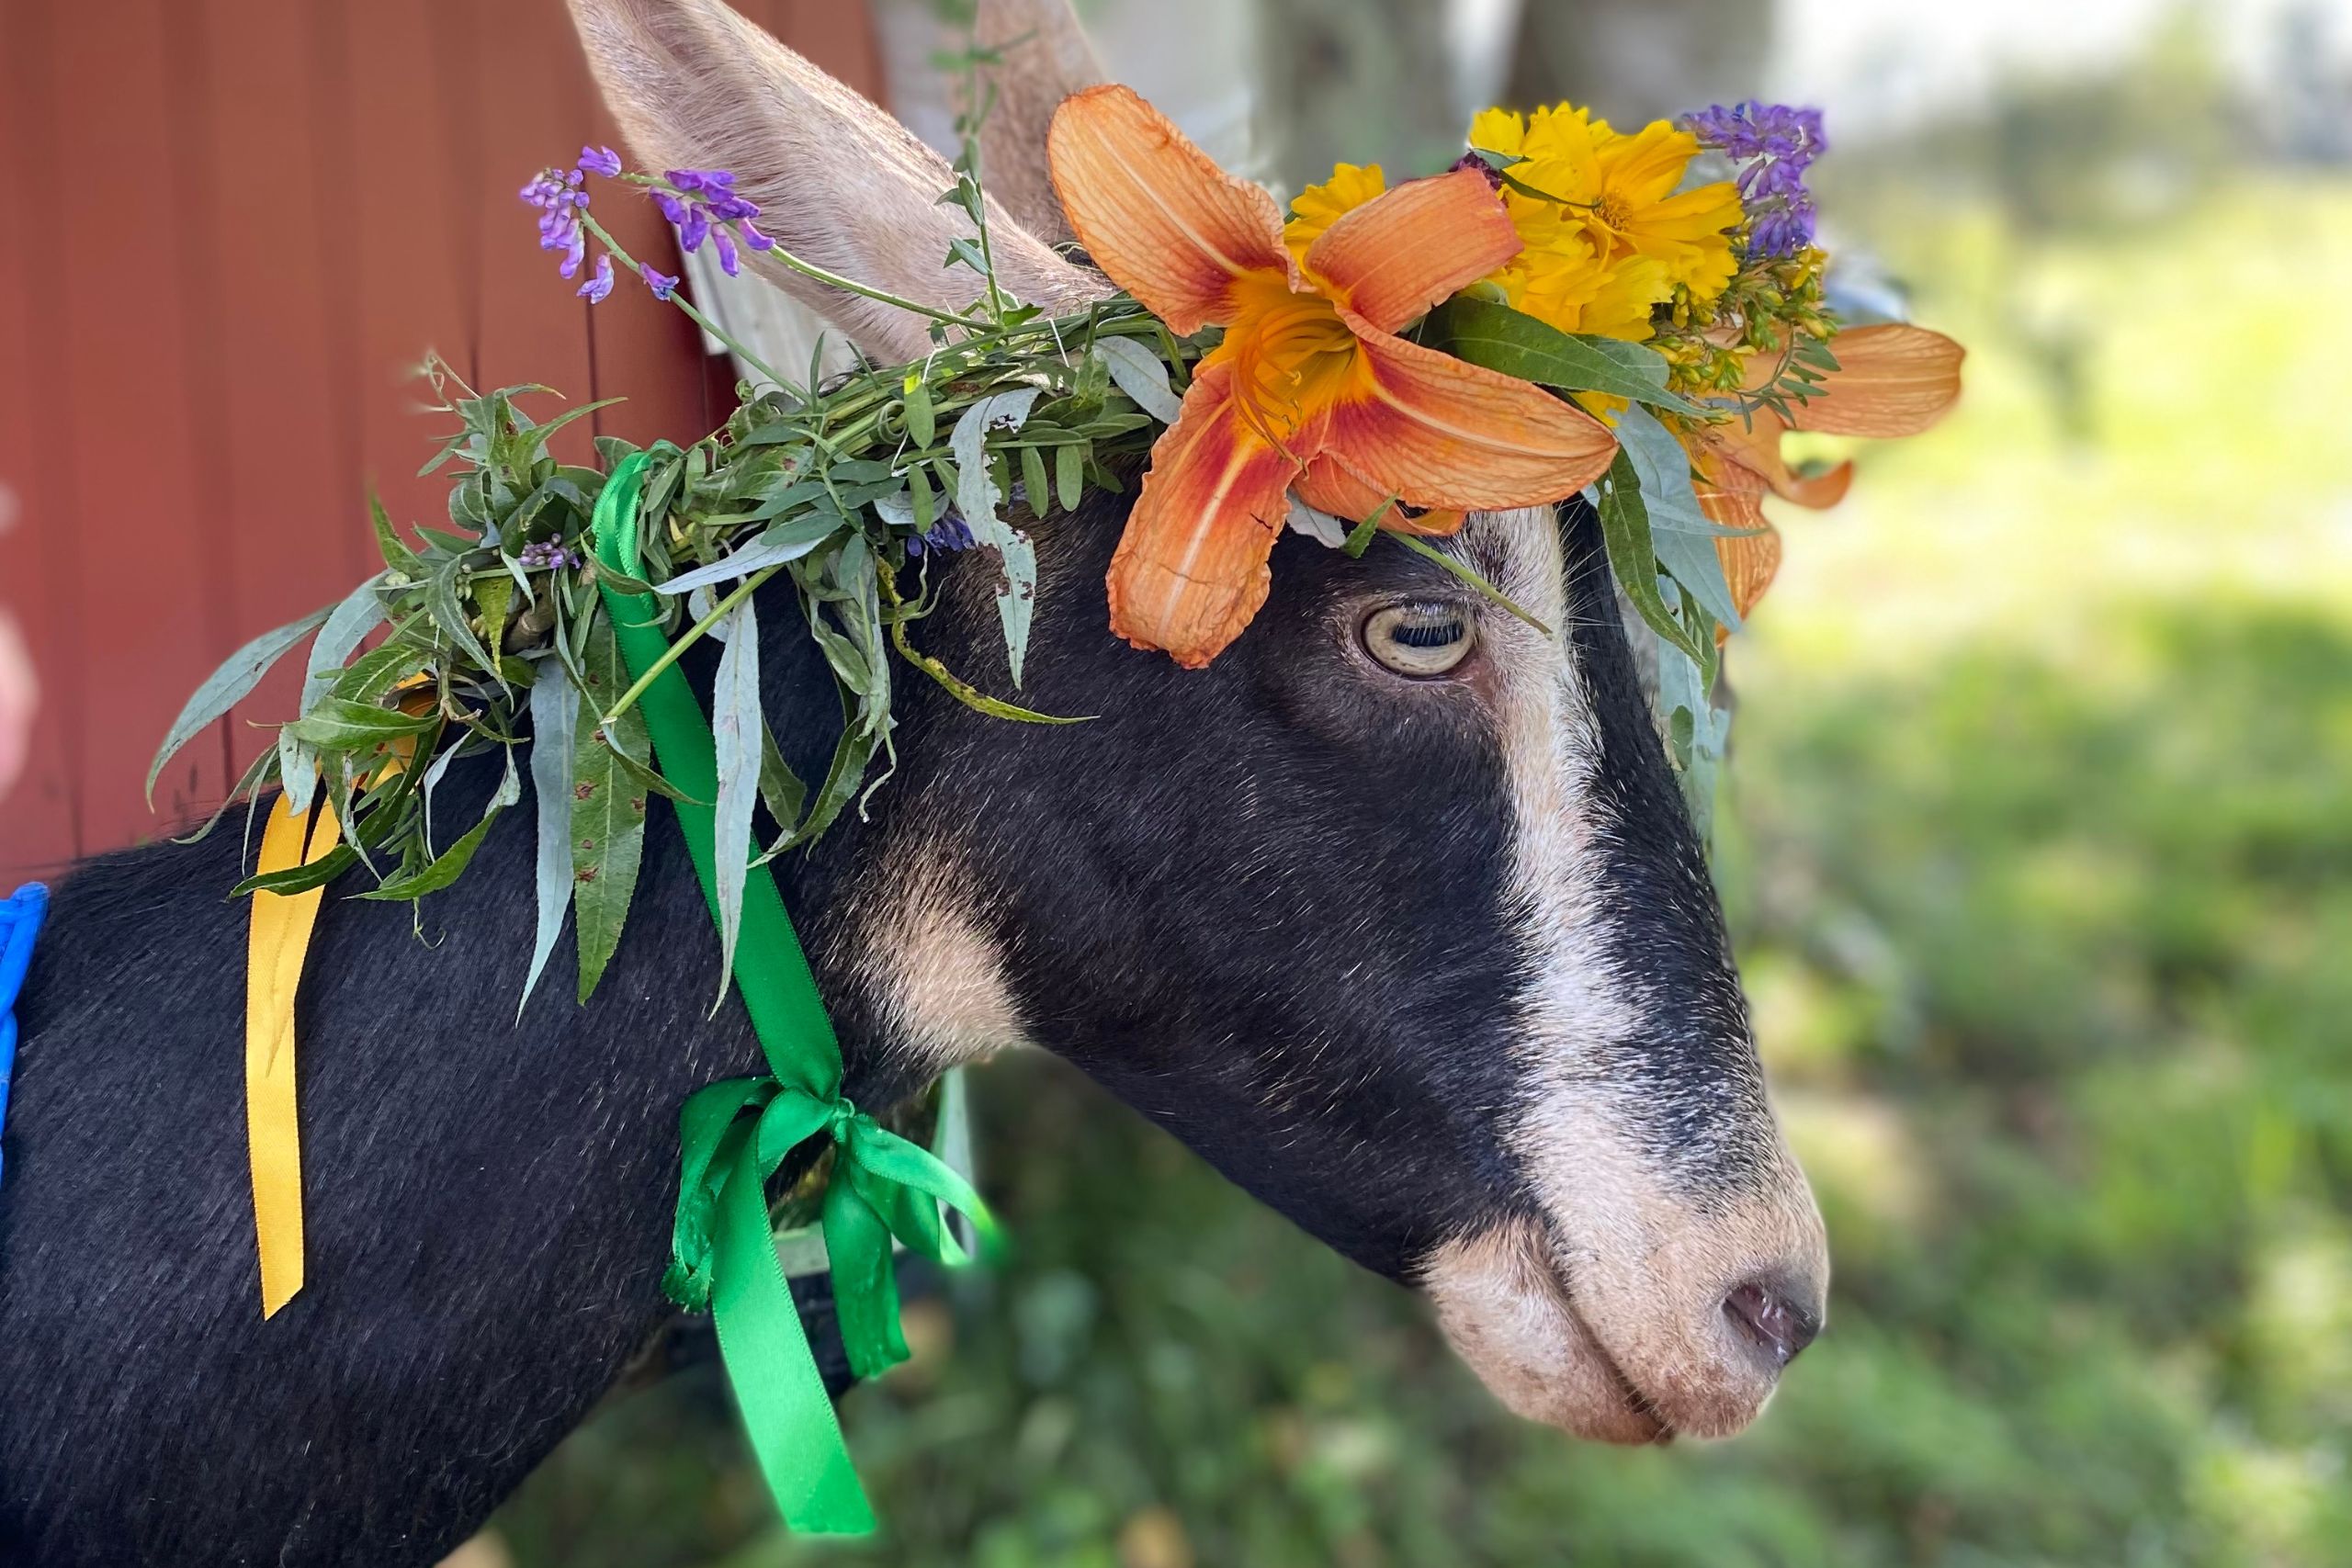 Goat dressed up in ribbons and greenery as a dairy queen!